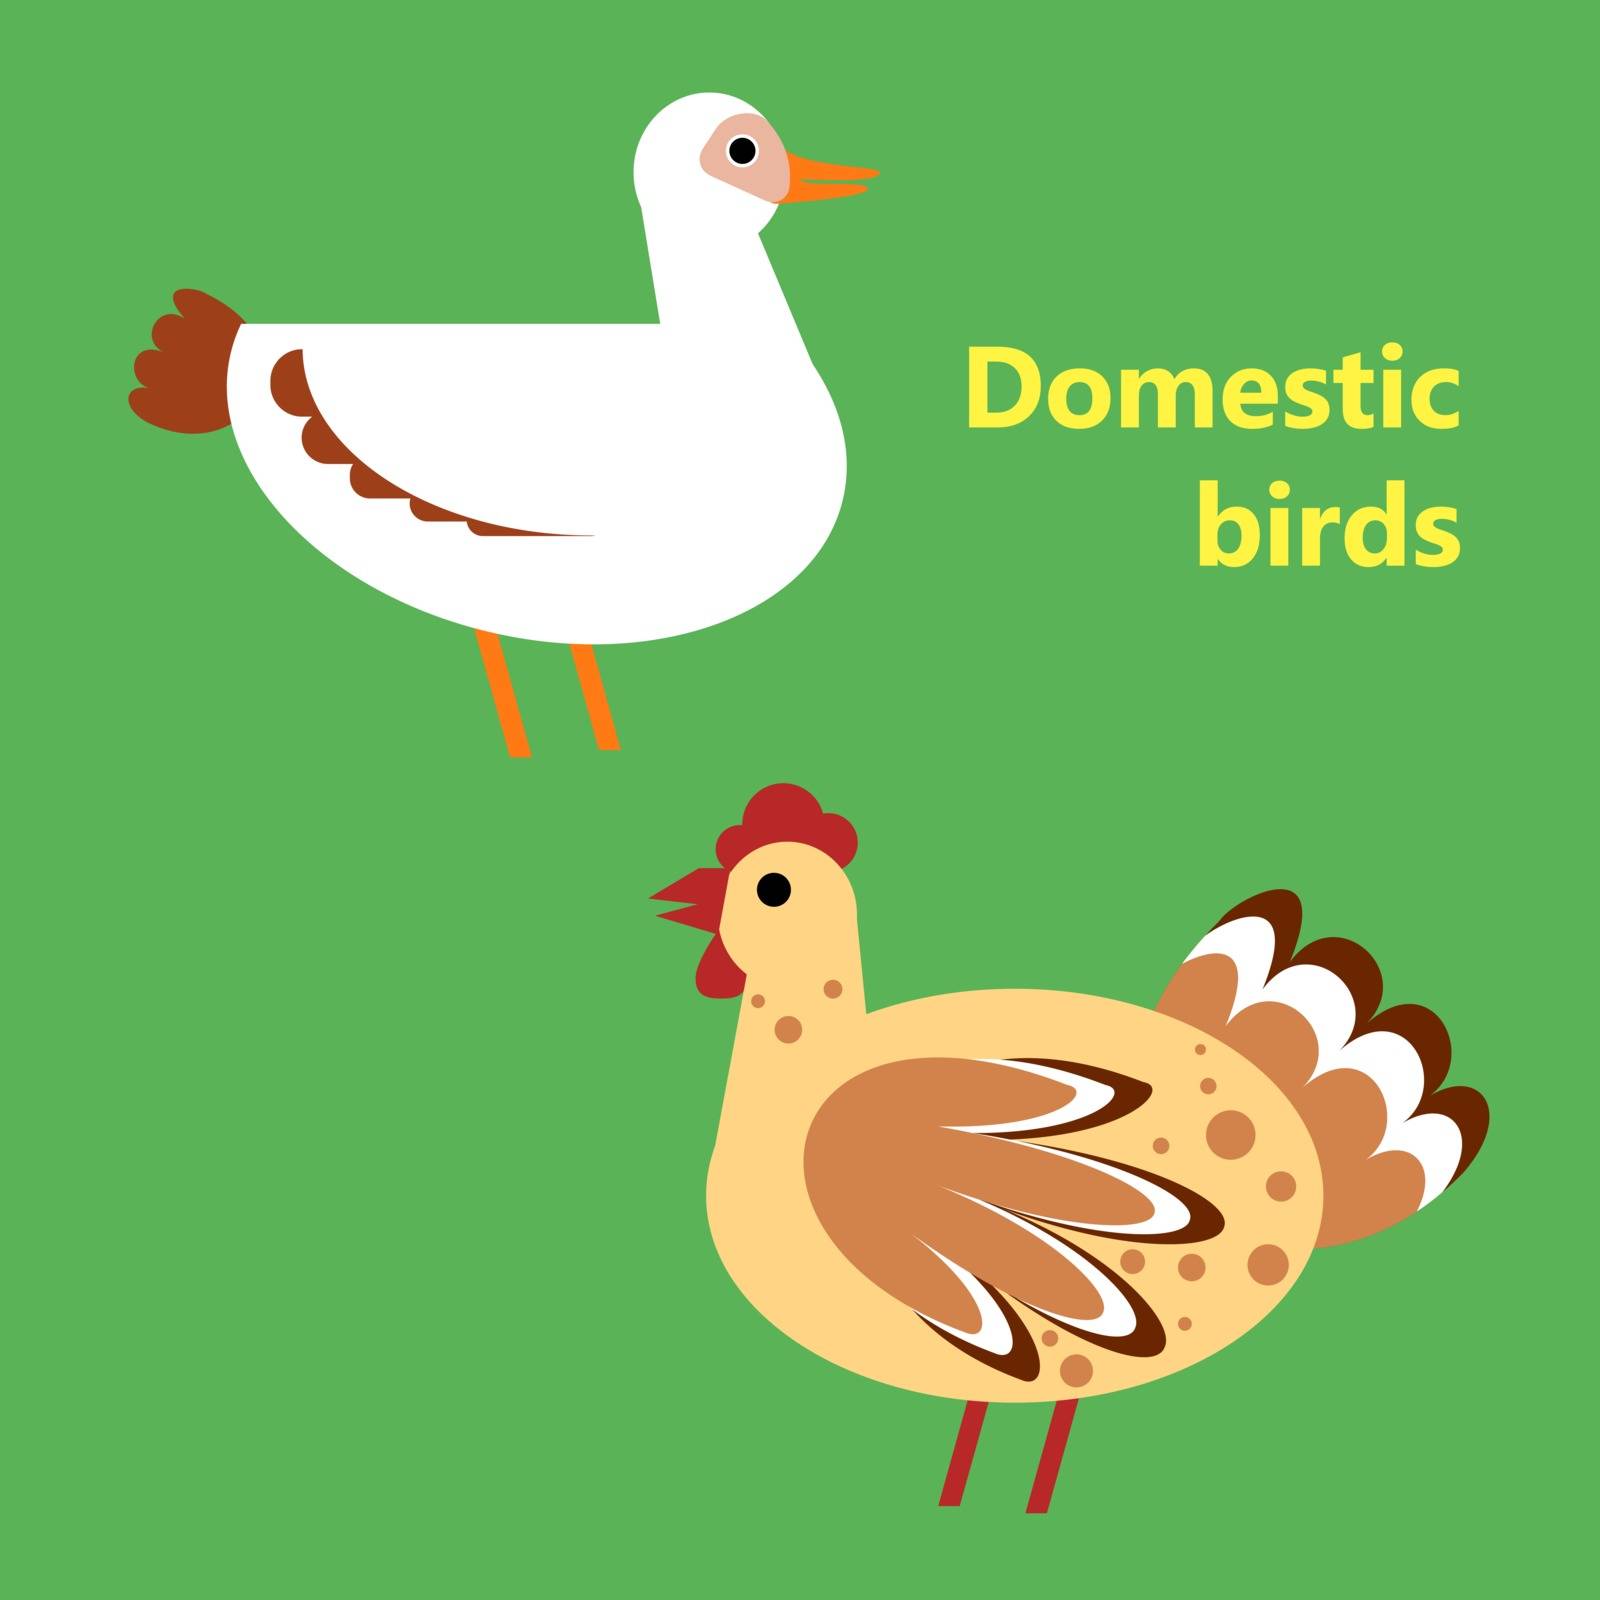 The Domestic birds duck and hen on simple color background. Educational flashcard for teaching preschool in kindergarten. Colorful flat cartoon style illustration.